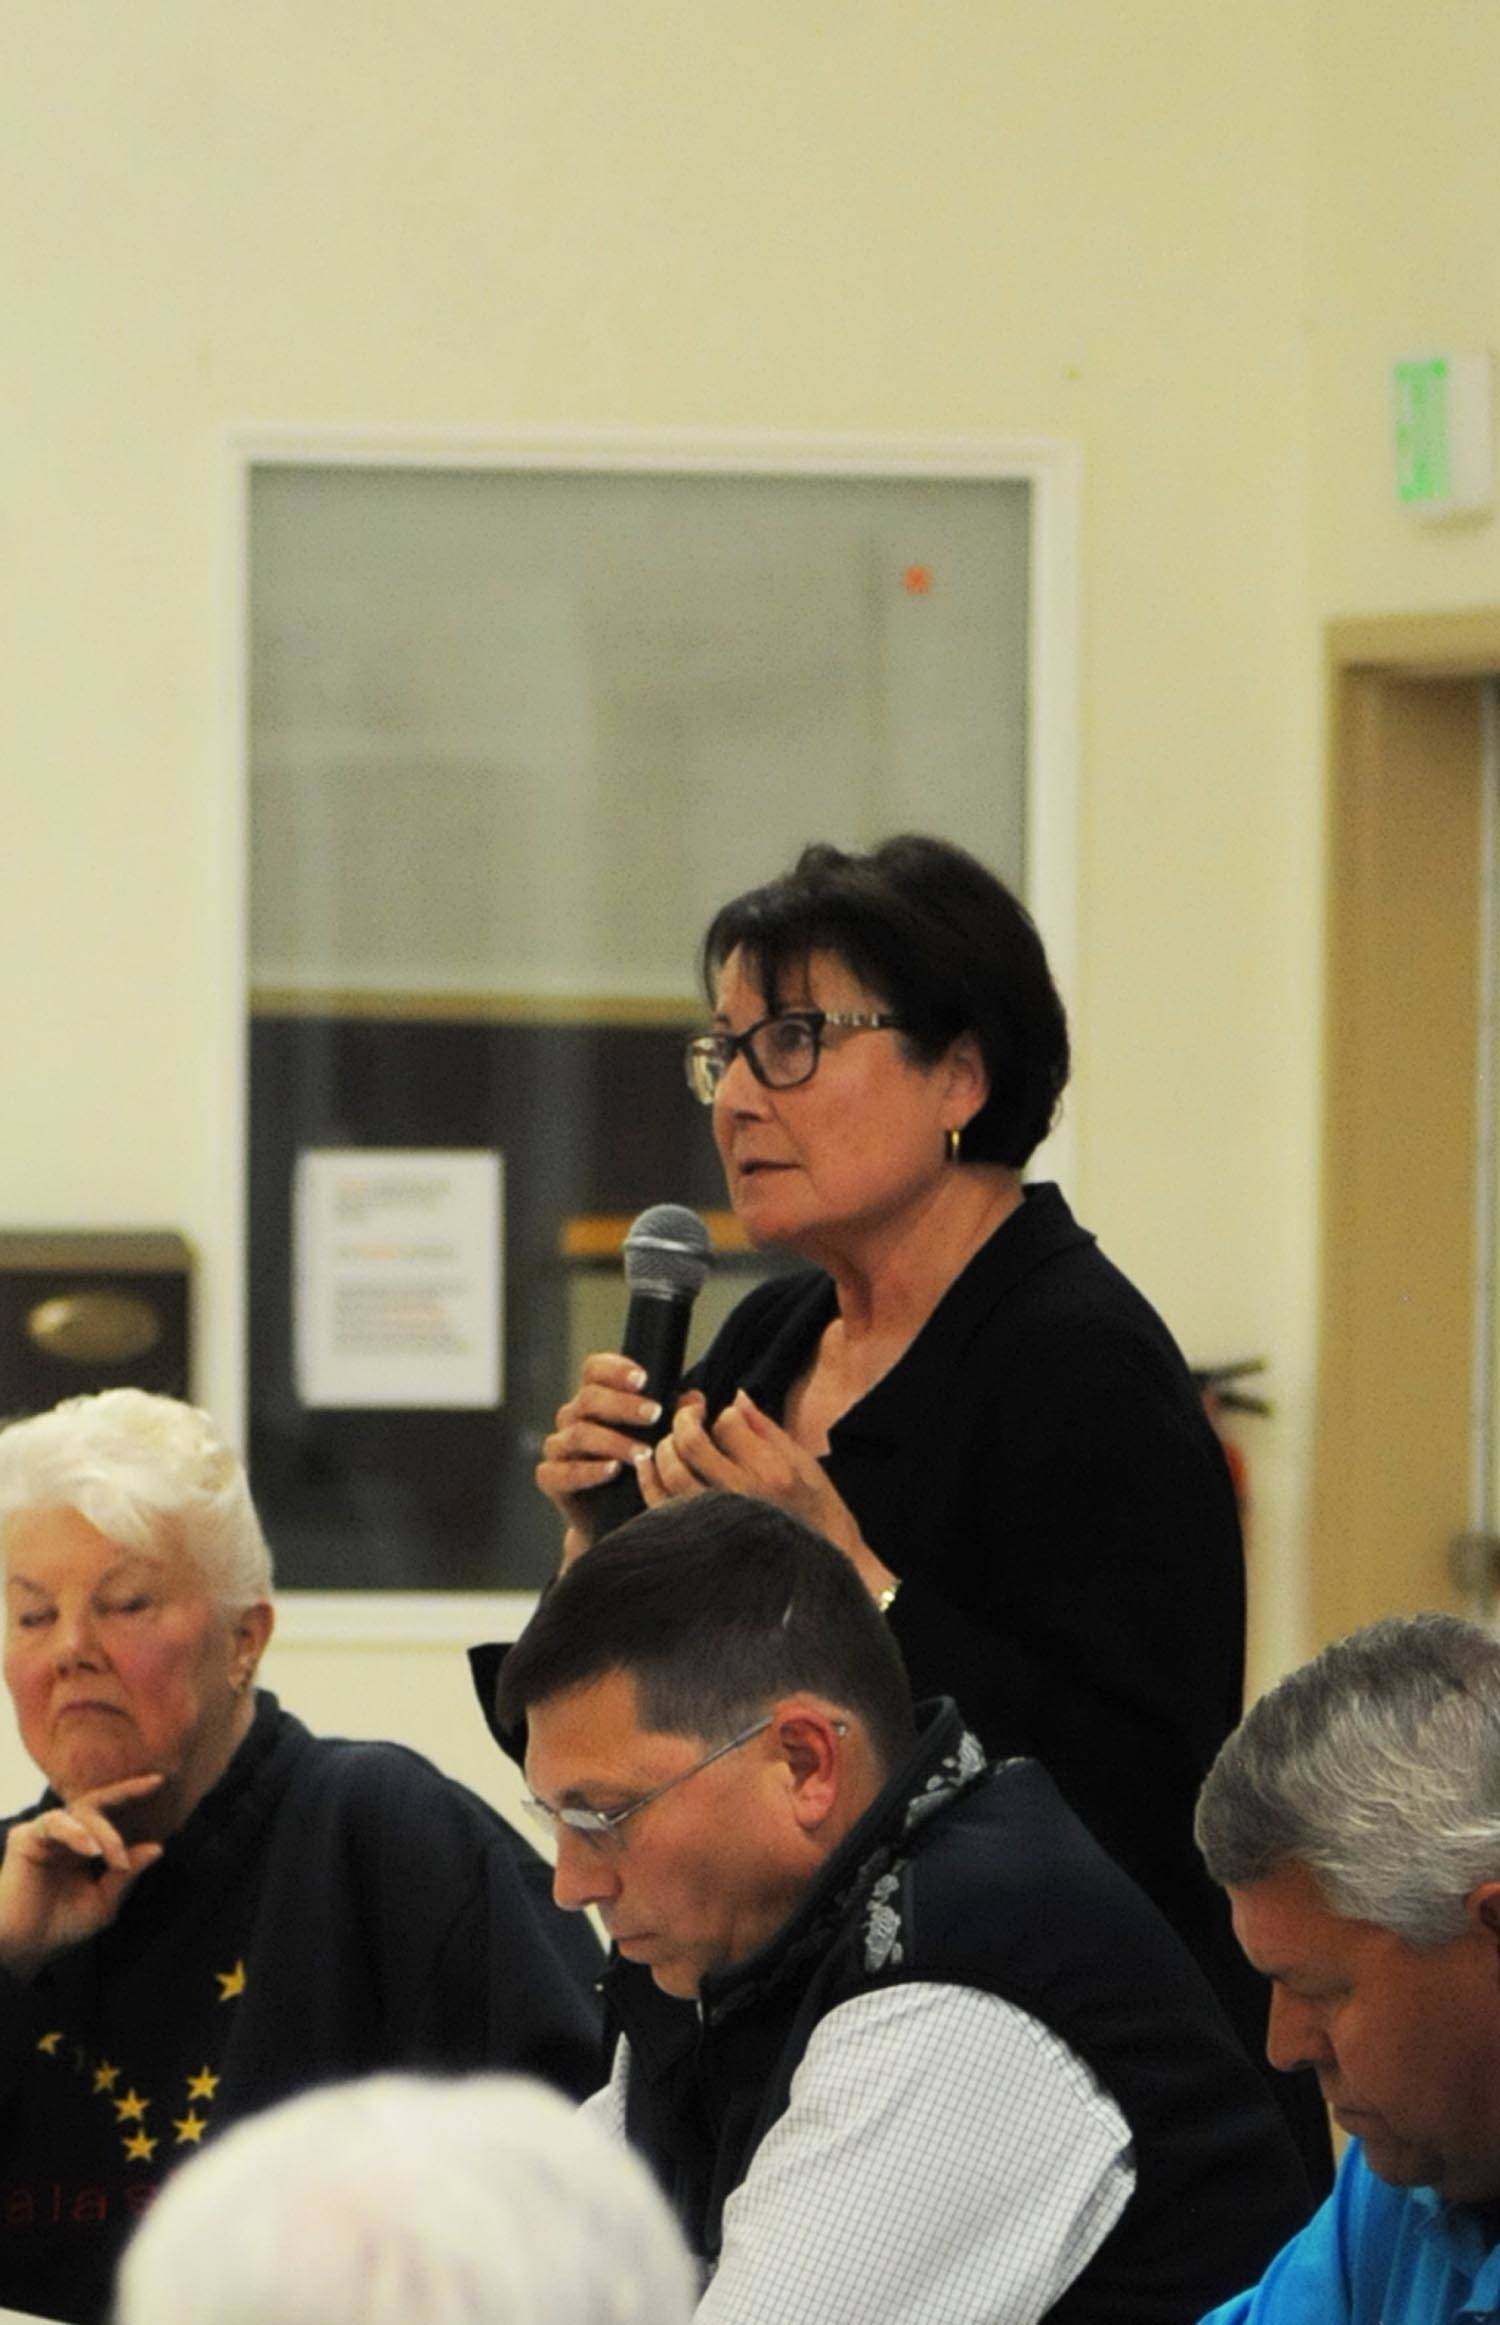 Linda Hutchings (standing), a candidate for Kenai Peninsula Borough mayor, answers a question during a forum with fellow candidates Dale Bagley (center) and Charlie Pierce (right) at the Funny River Community Center on Aug. 16, 2017 in Funny River, Alaska. (Photo by Elizabeth Earl/Peninsula Clarion, file)